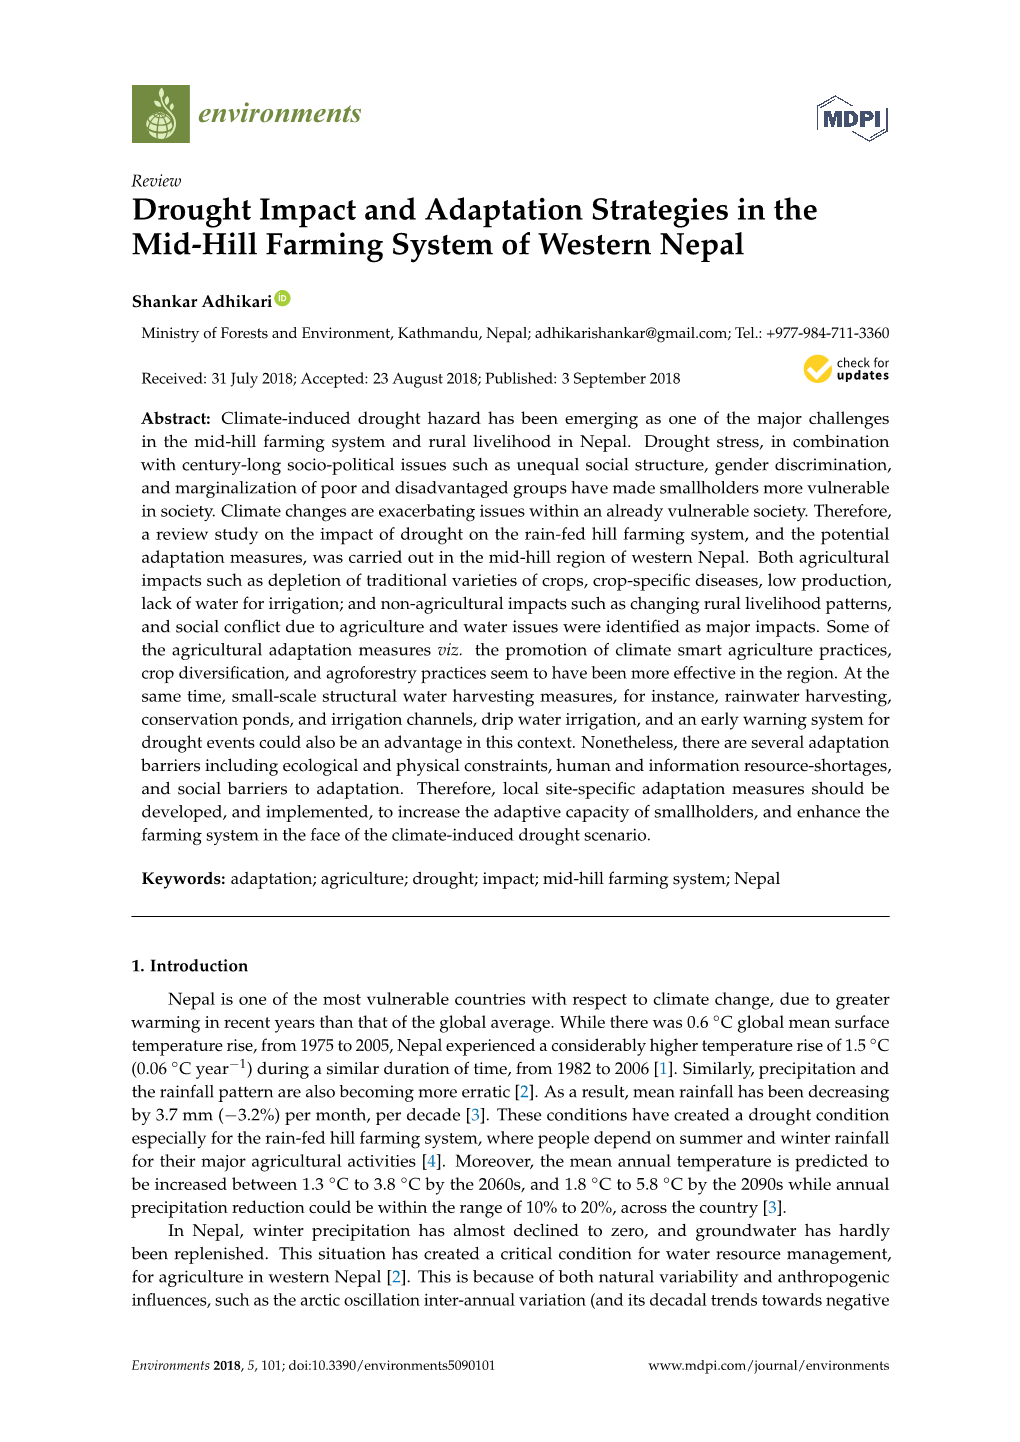 Drought Impact and Adaptation Strategies in the Mid-Hill Farming System of Western Nepal